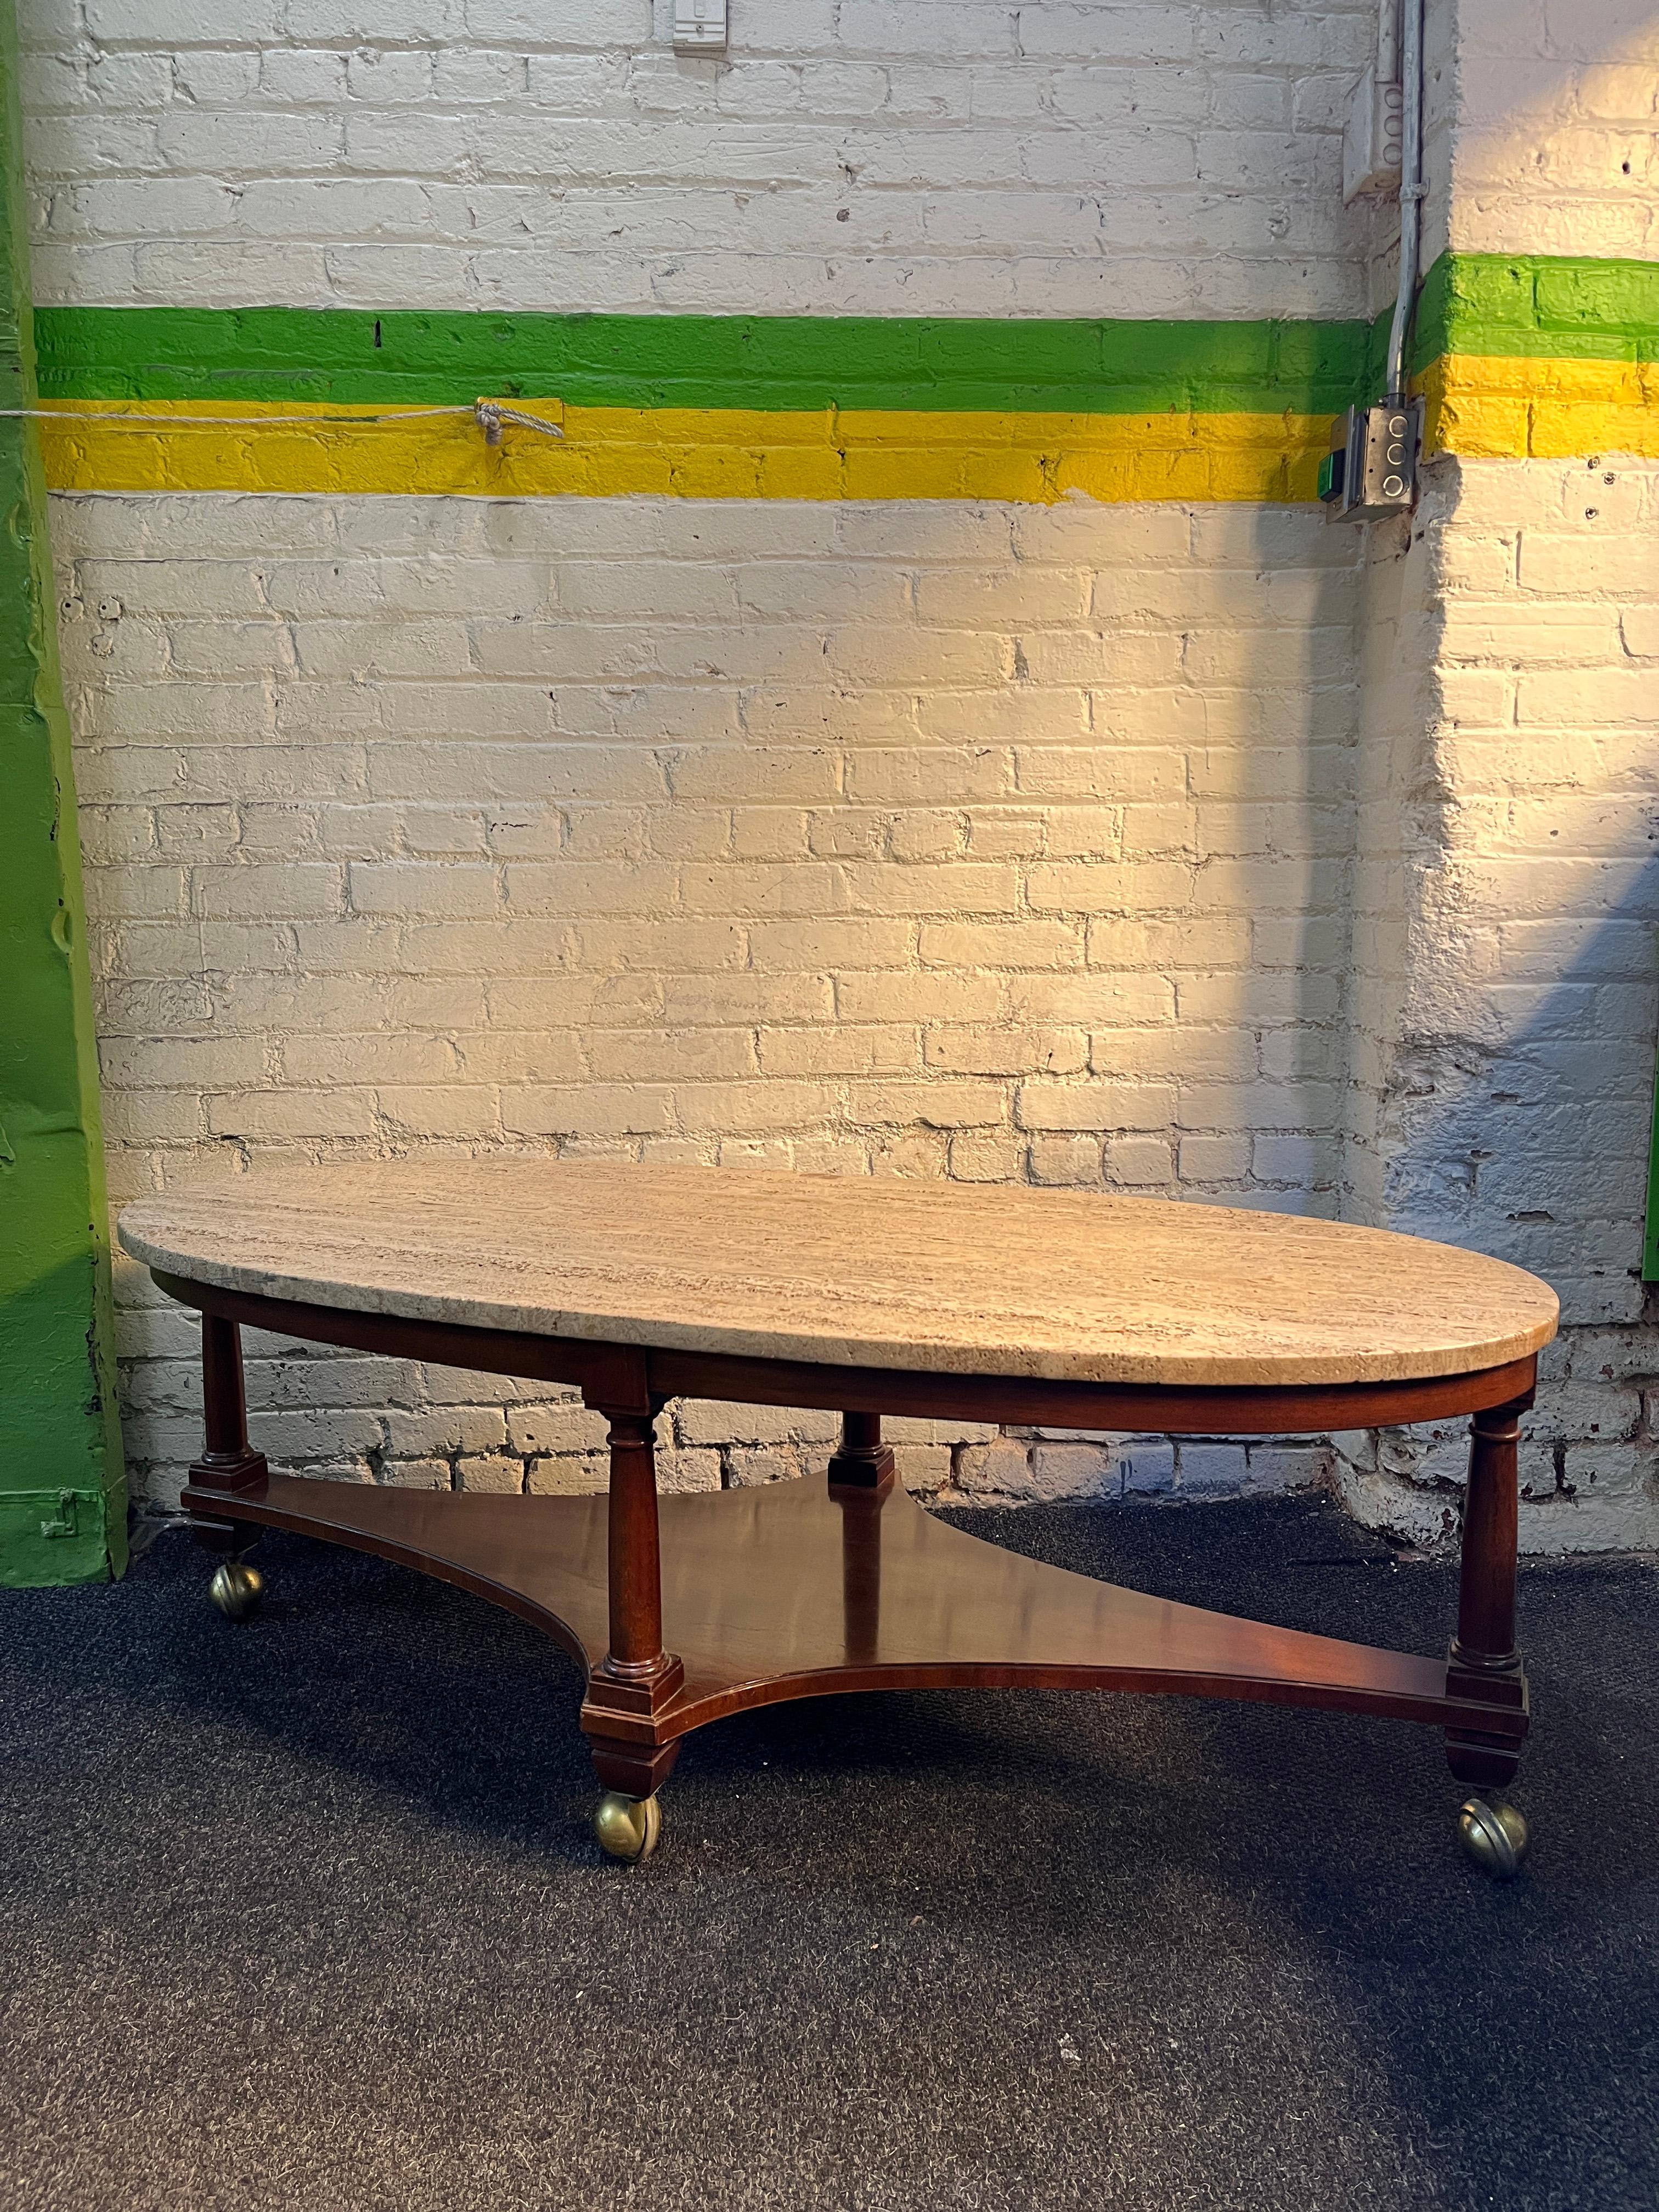 One beautiful surfboard style 2 tier coffee table by William a Berkey Furniture - John Widdicomb. Of walnut frame and travertine slate top on brass casters. 1960s.

